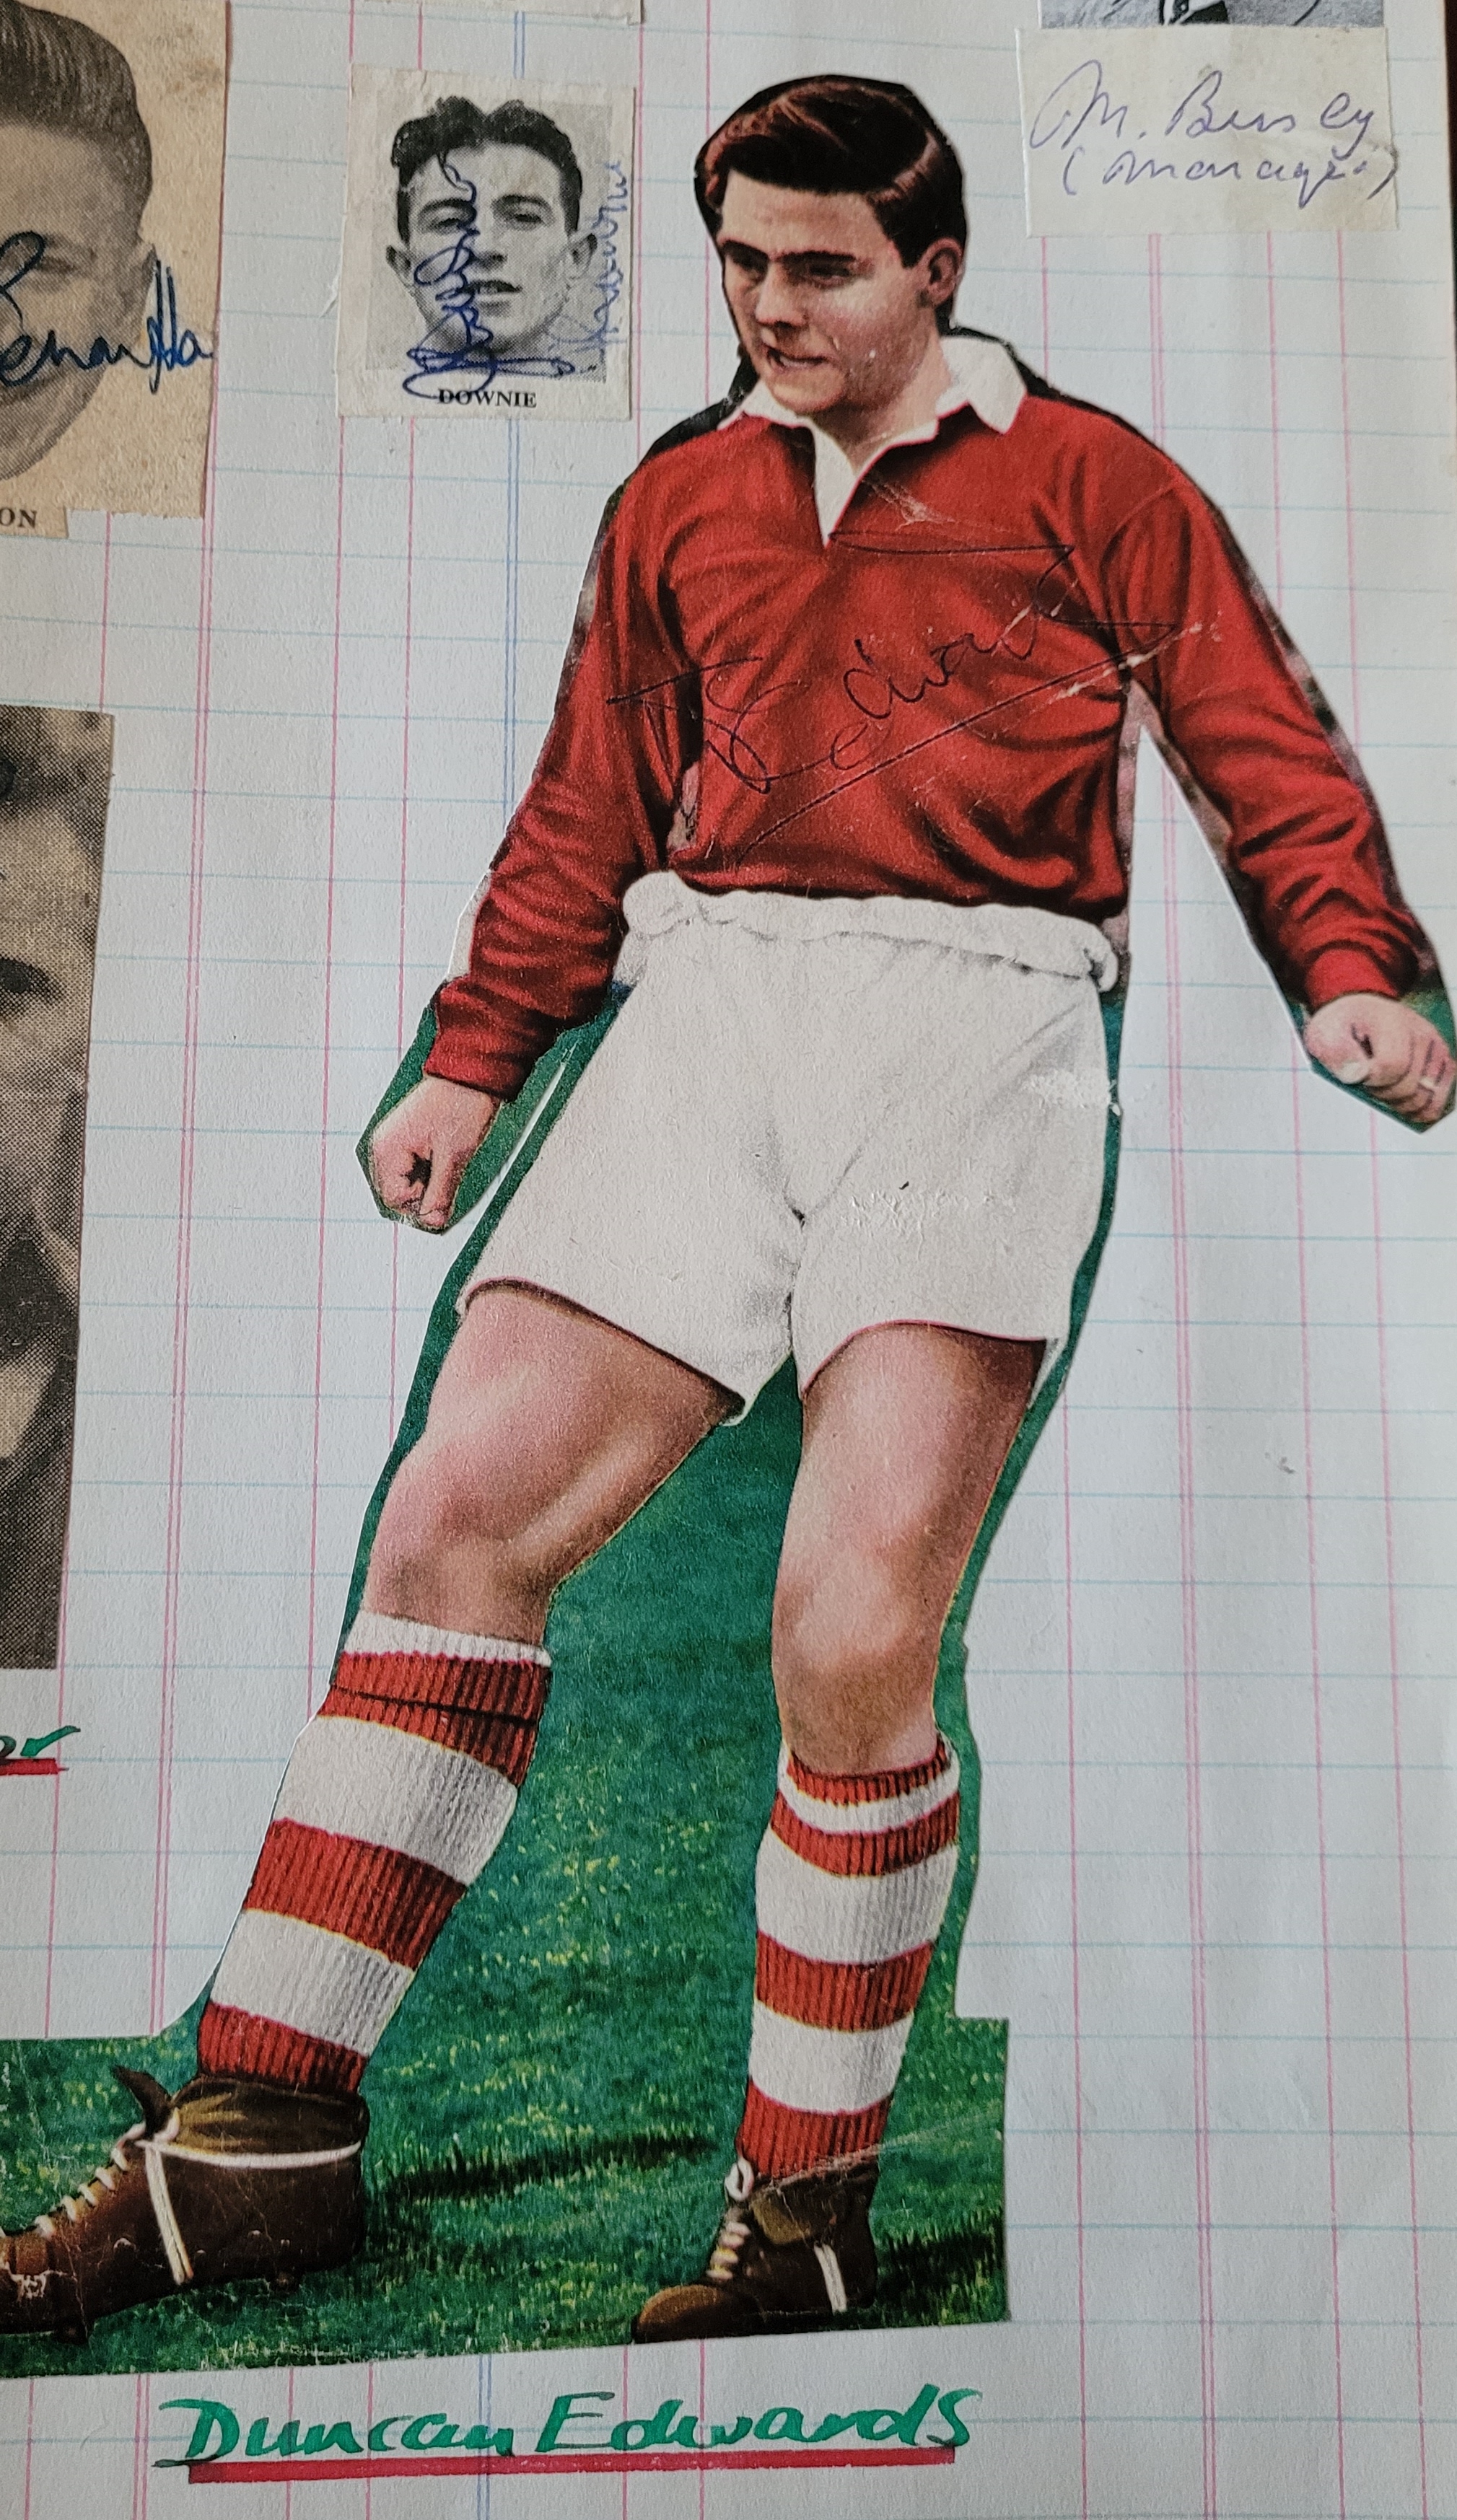 BOOK CONTAINING OVER 1,300 AUTOGRAPHED PICTURES INC' 4 OF MANCHESTER UNITED'S DUNCAN EDWARDS - Image 4 of 160